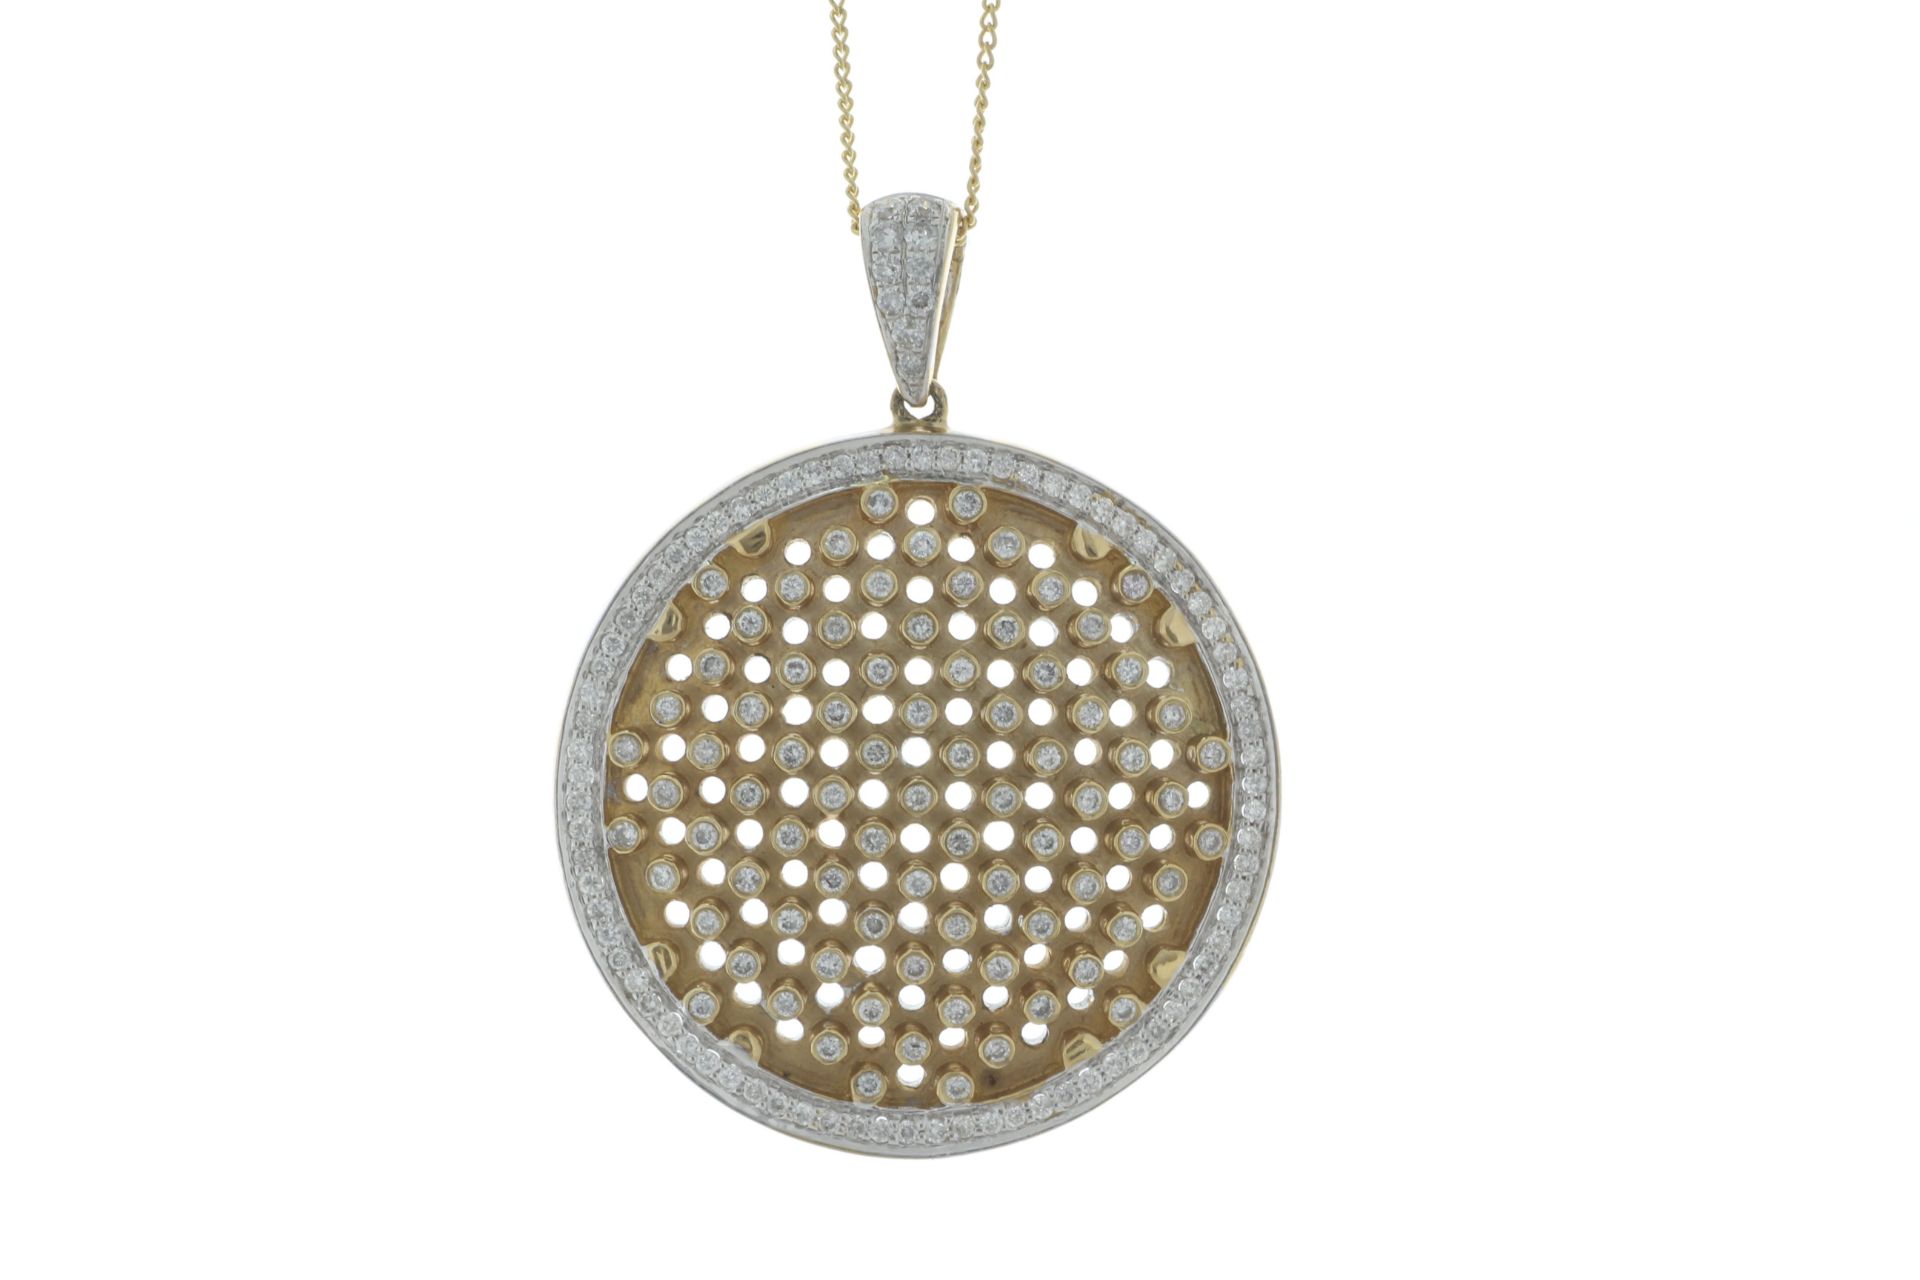 14ct Gold Round Cluster Diamond Pendant 1.00 Carats - Valued By IDI £8,110.00 - Seventy two round